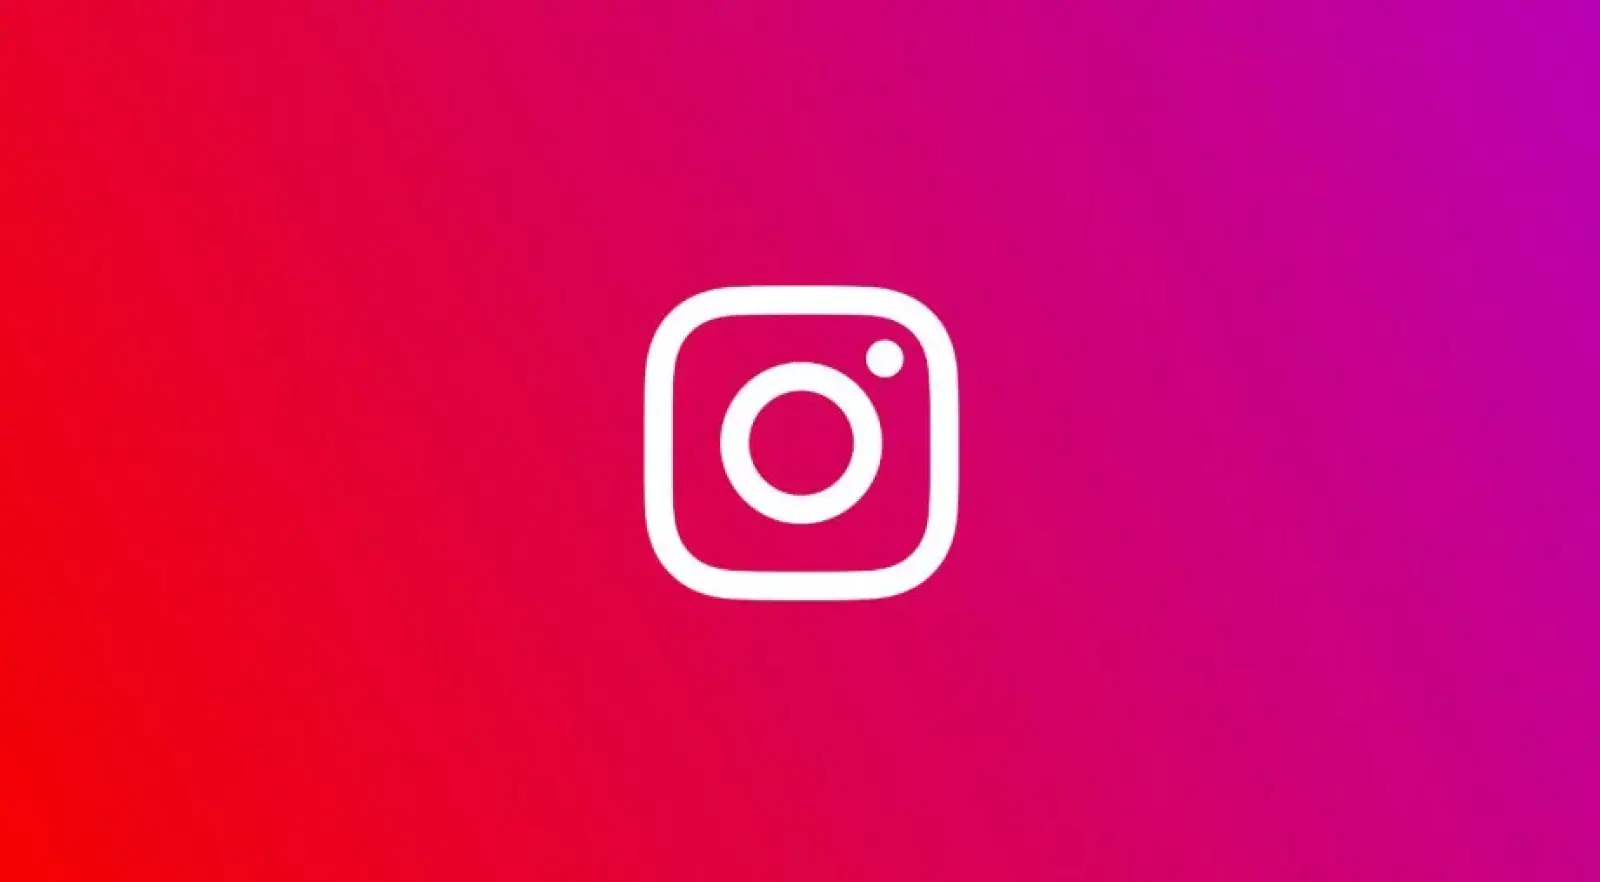 Instagram: Very useful update came, children using it at night got worried